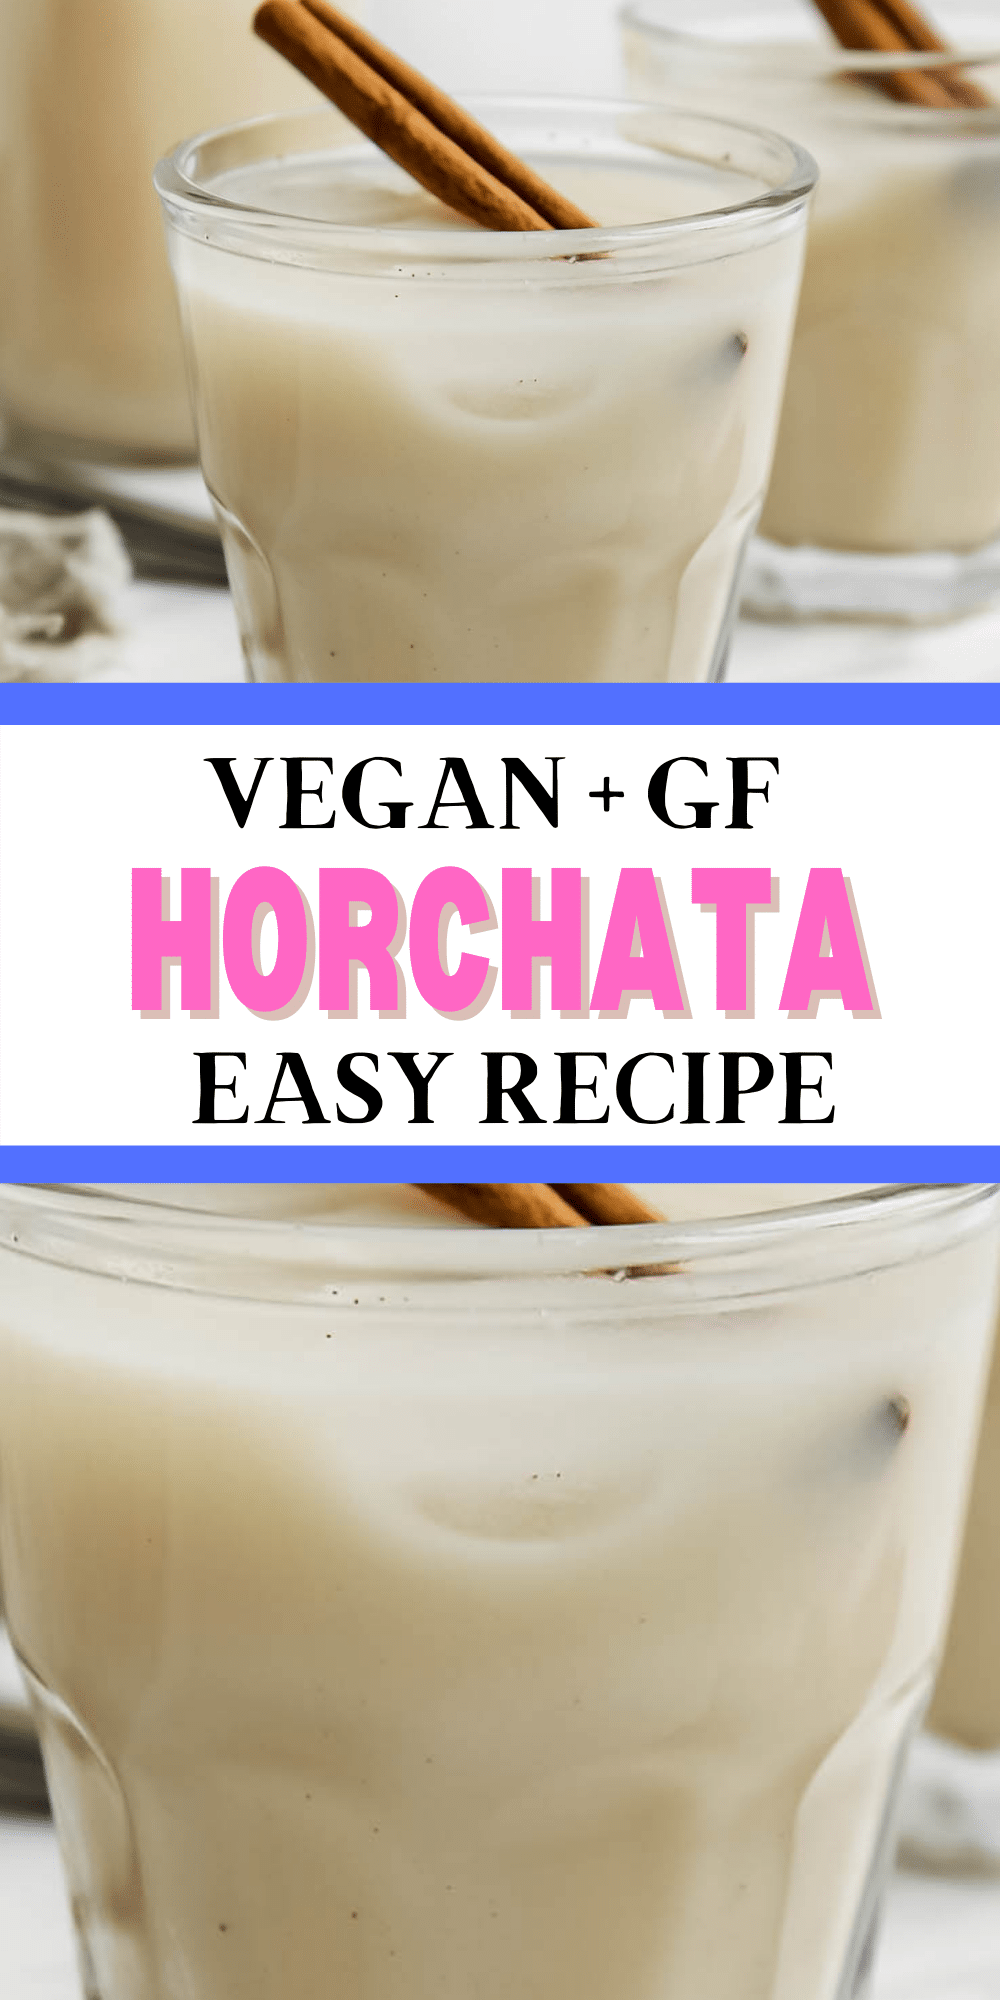 A sweet creamy drink made from rice is delicious, comforting, and so simple to make. Vegan Horchata will be your new favorite plant-based specialty drink!